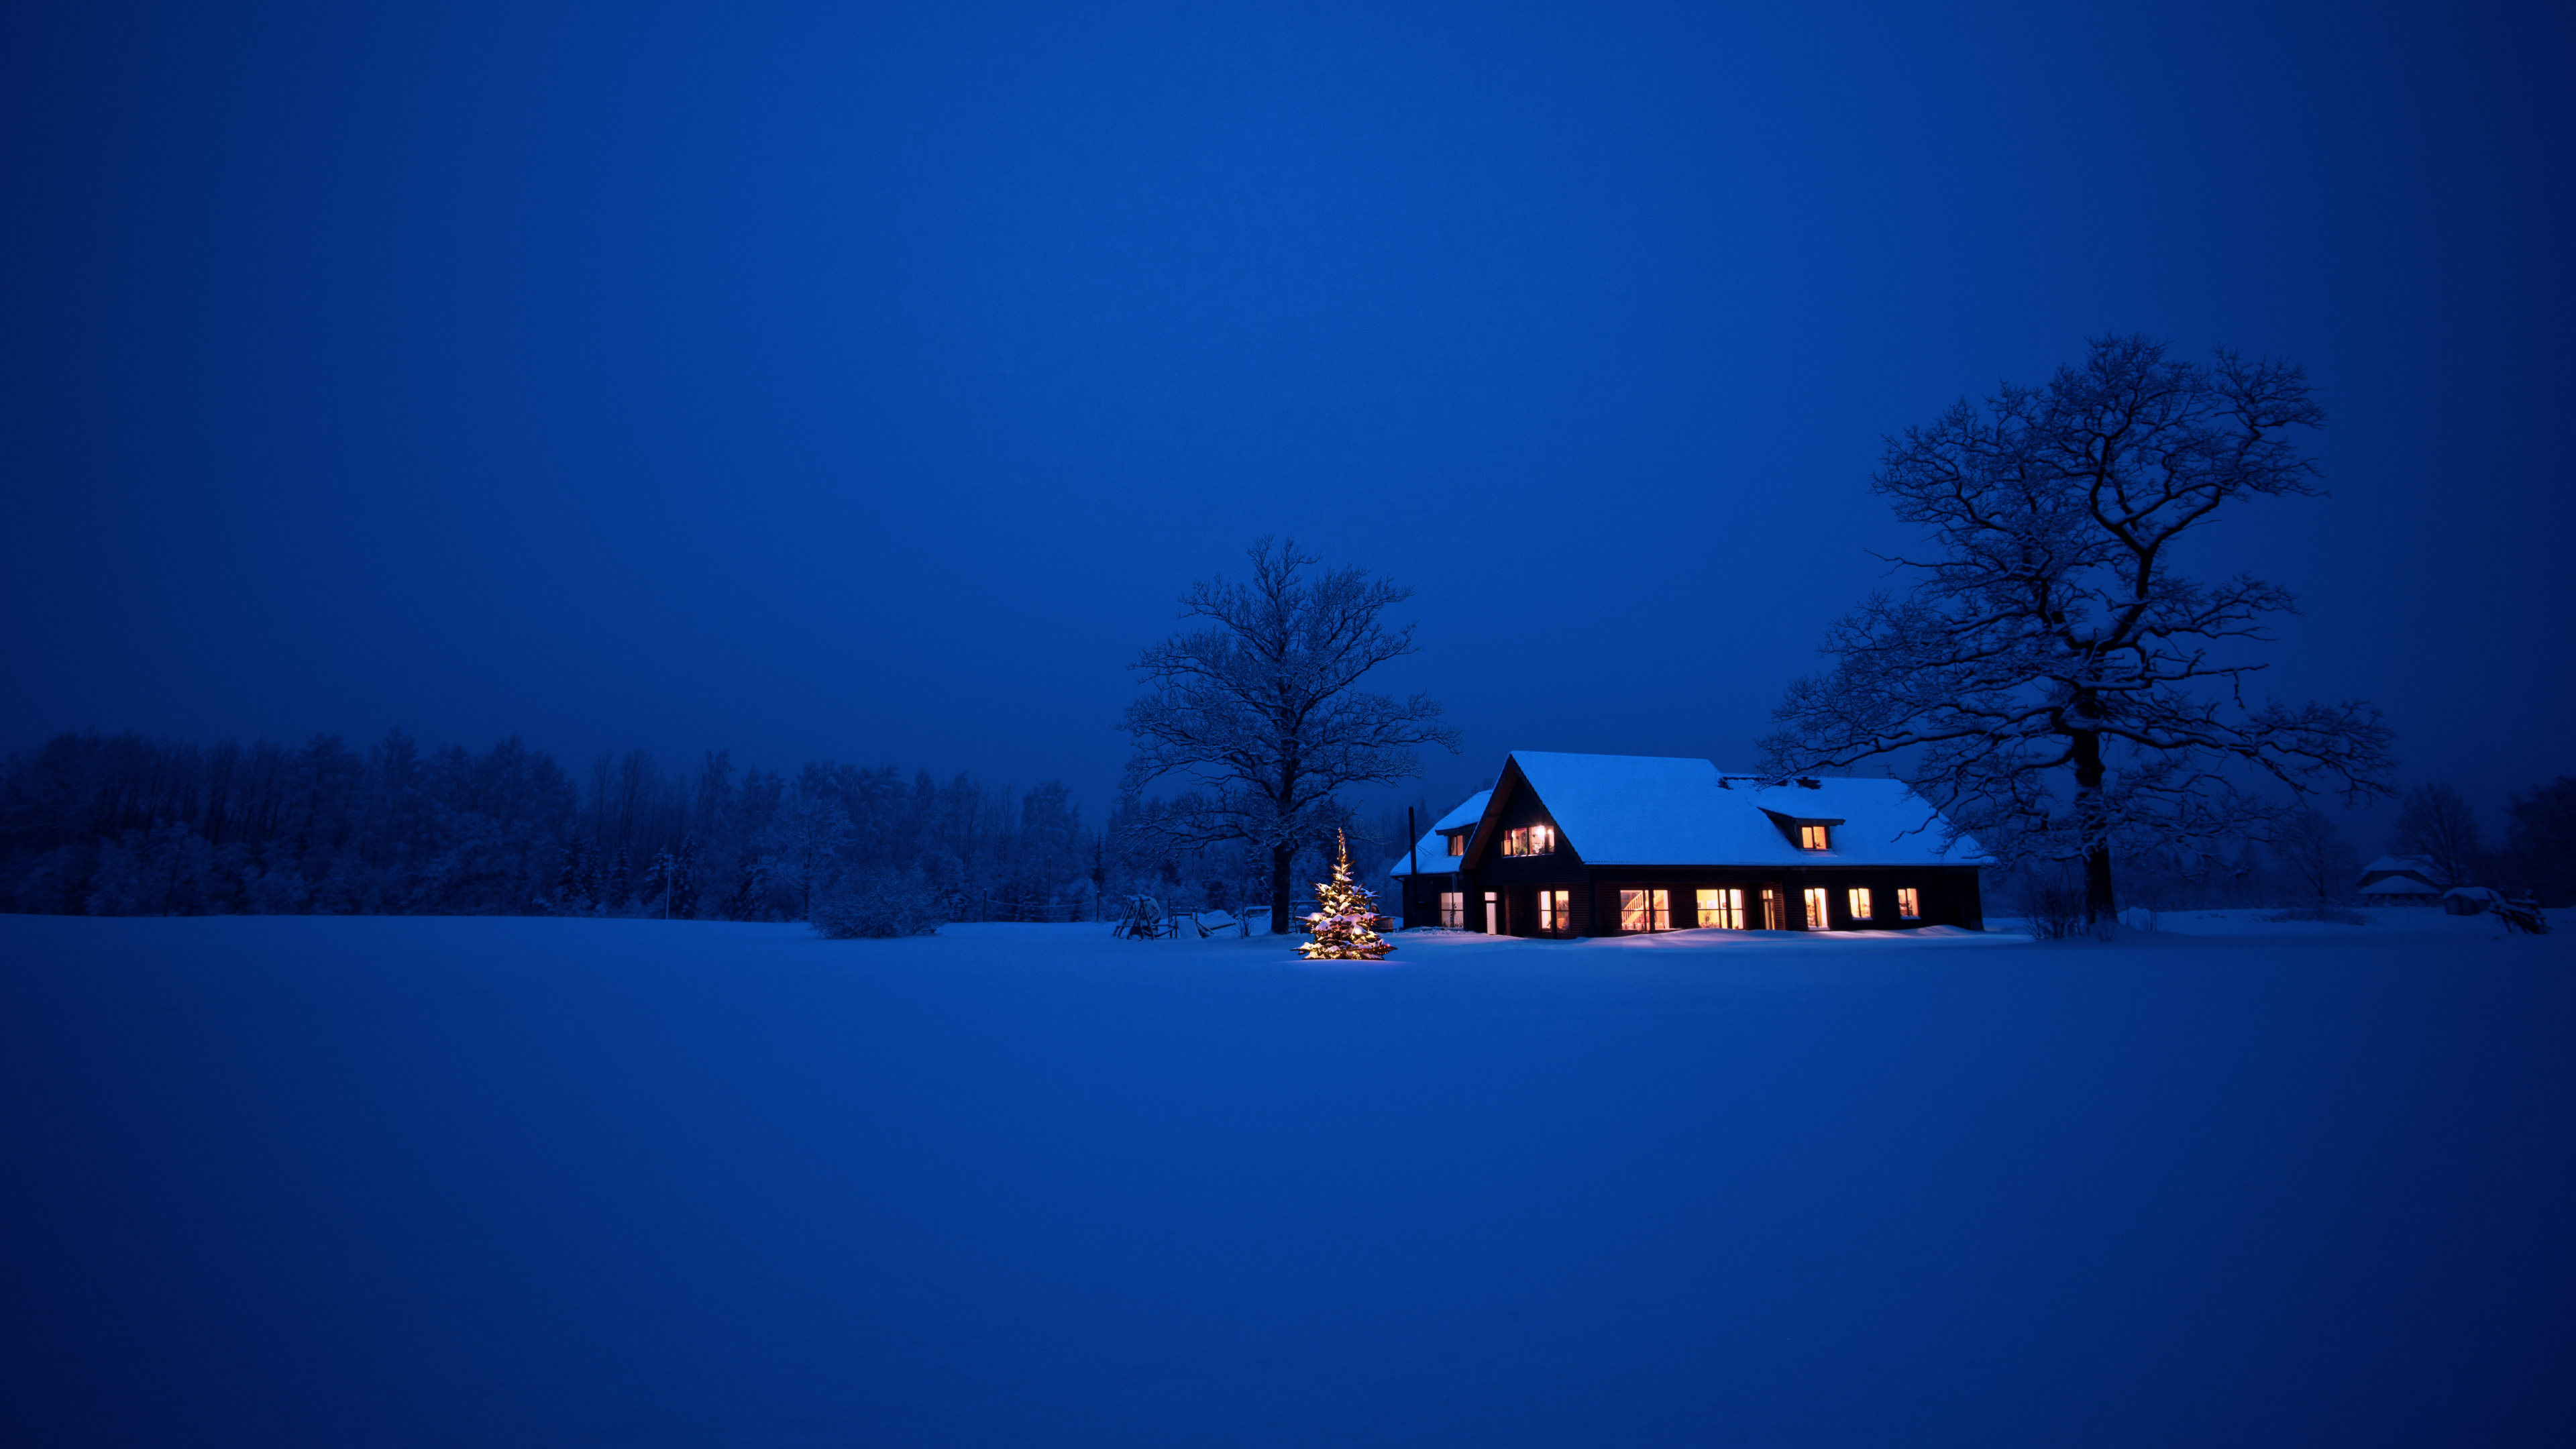 Brown Wooden House on Snow Covered Ground During Night Time. Wallpaper in 3840x2160 Resolution